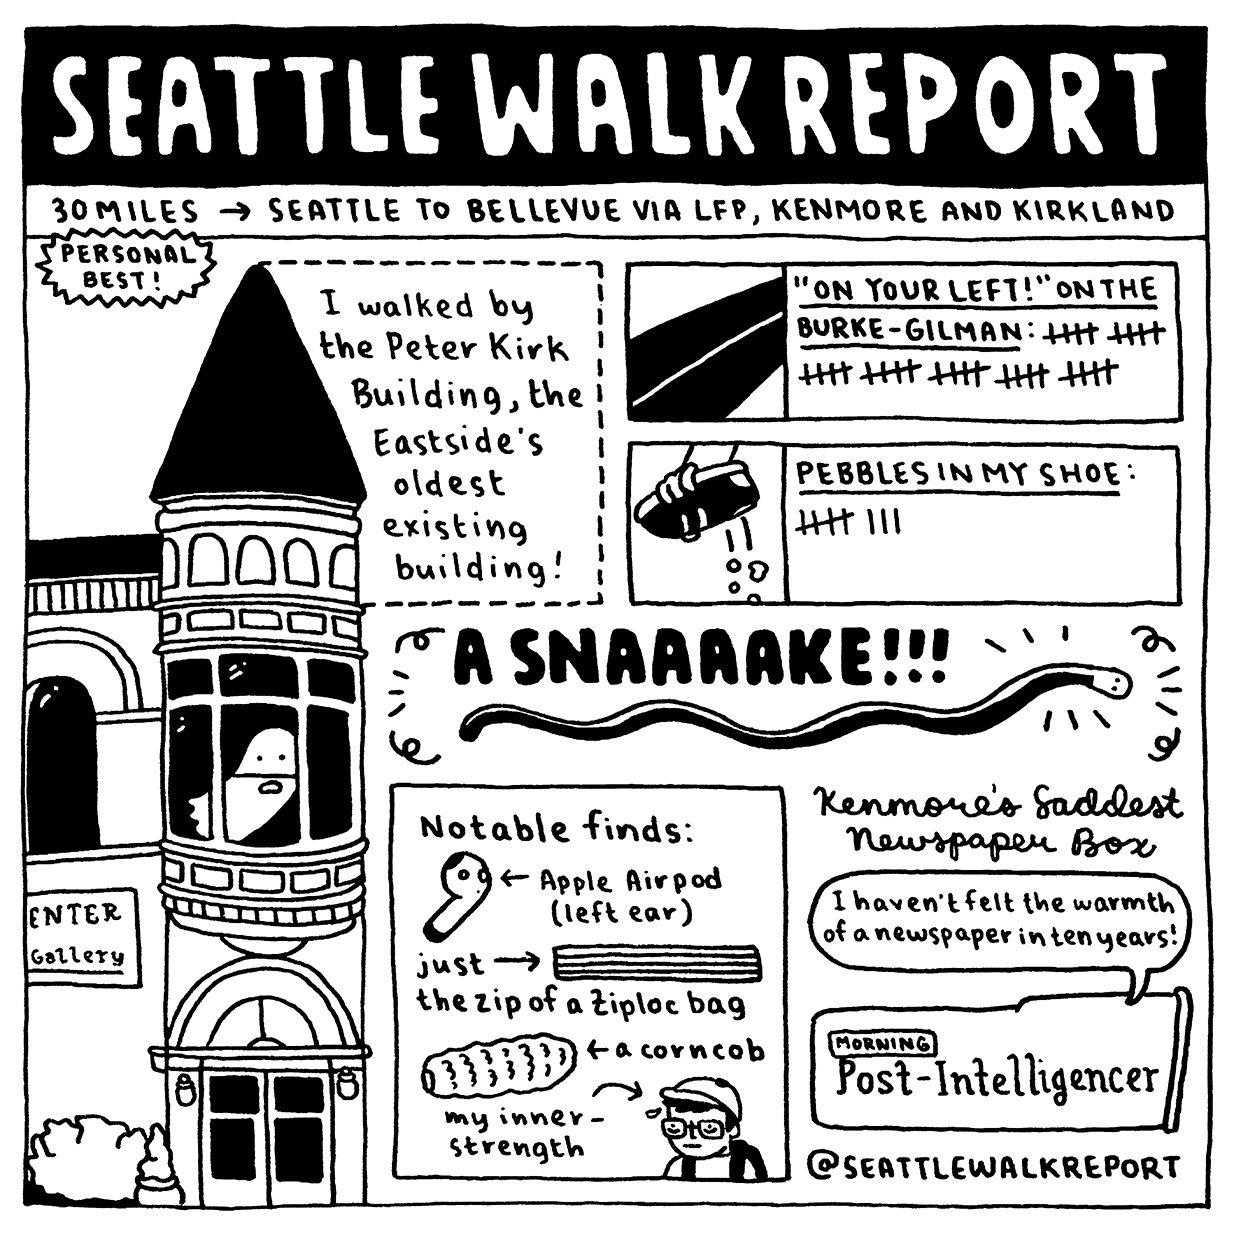 A comic by Susanna Ryan showcases the many sights that she encountered on a 30-mile-long walk from Seattle to the Eastside, including a large historic building, a bicycle-pedestrian trail, numerous pebbles and other findings.